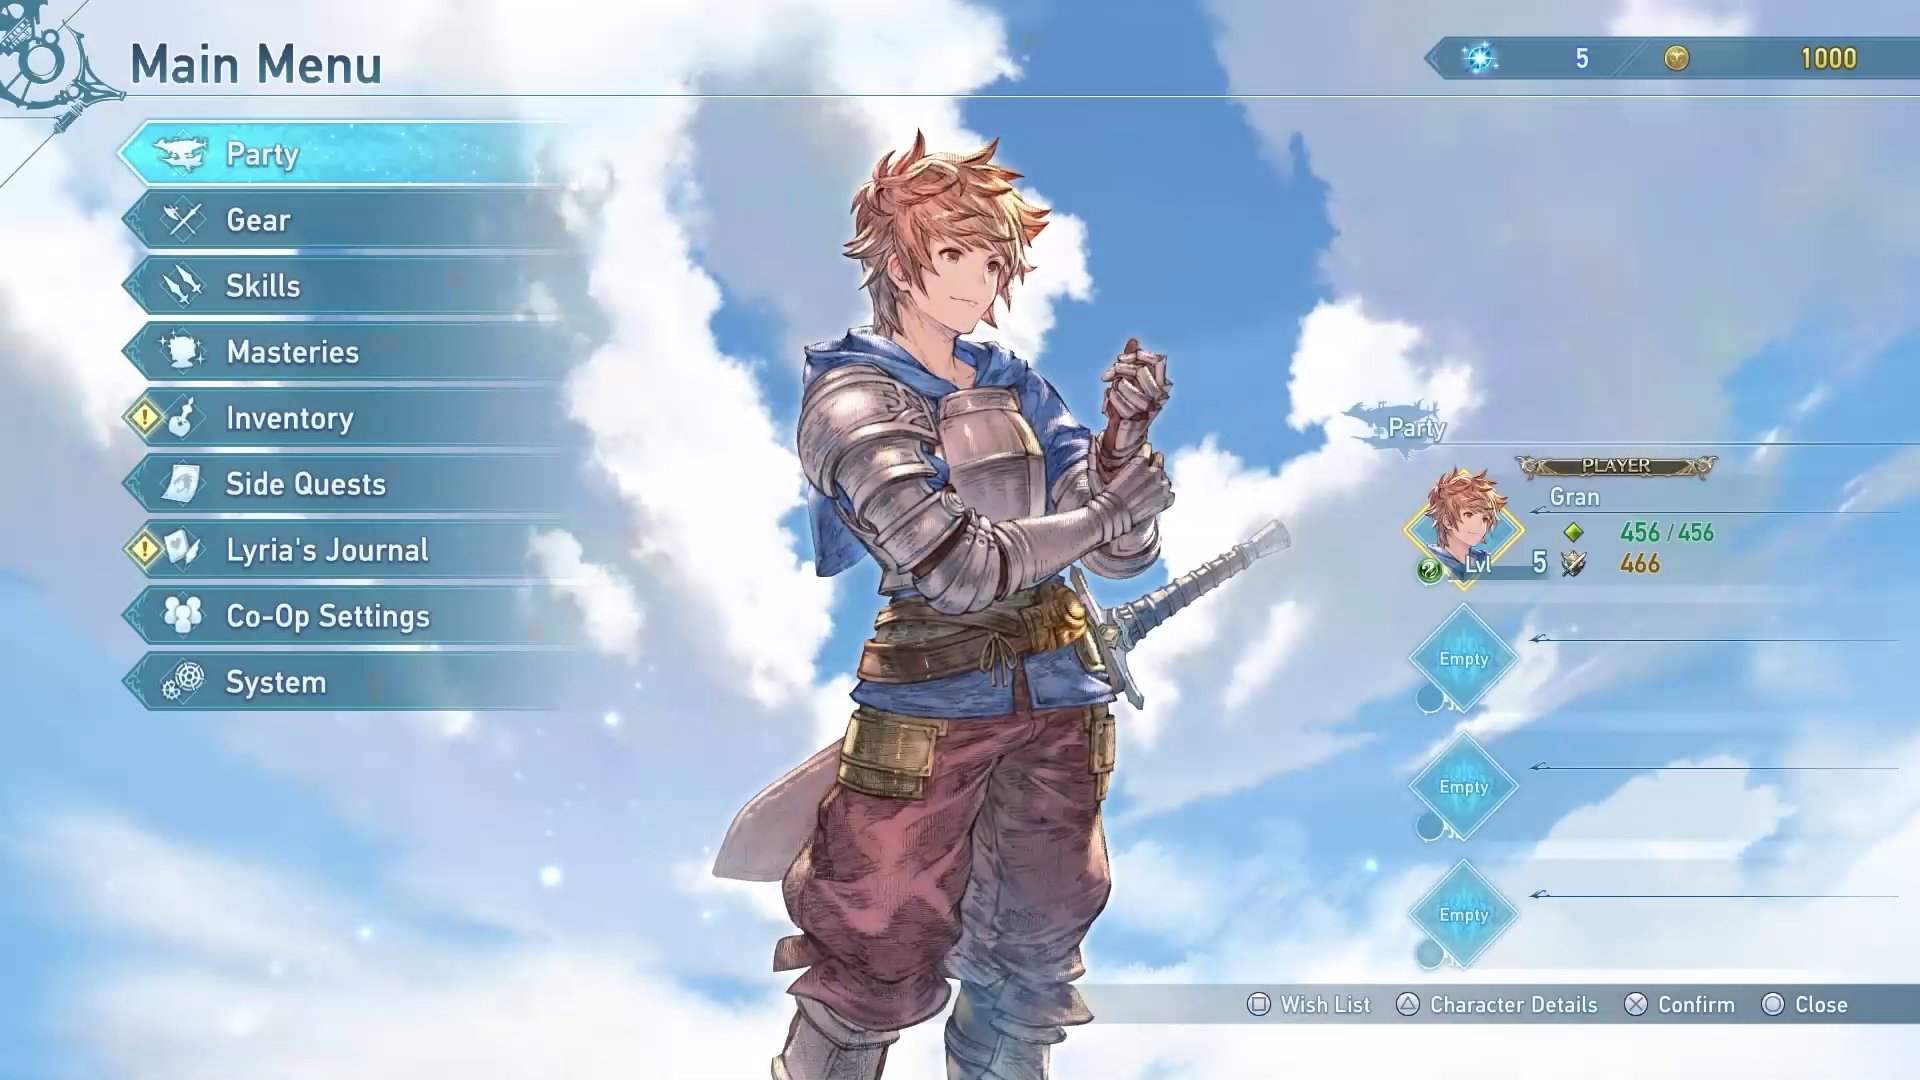 Granblue Fantasy: Relink [Deluxe Edition] for PlayStation 5